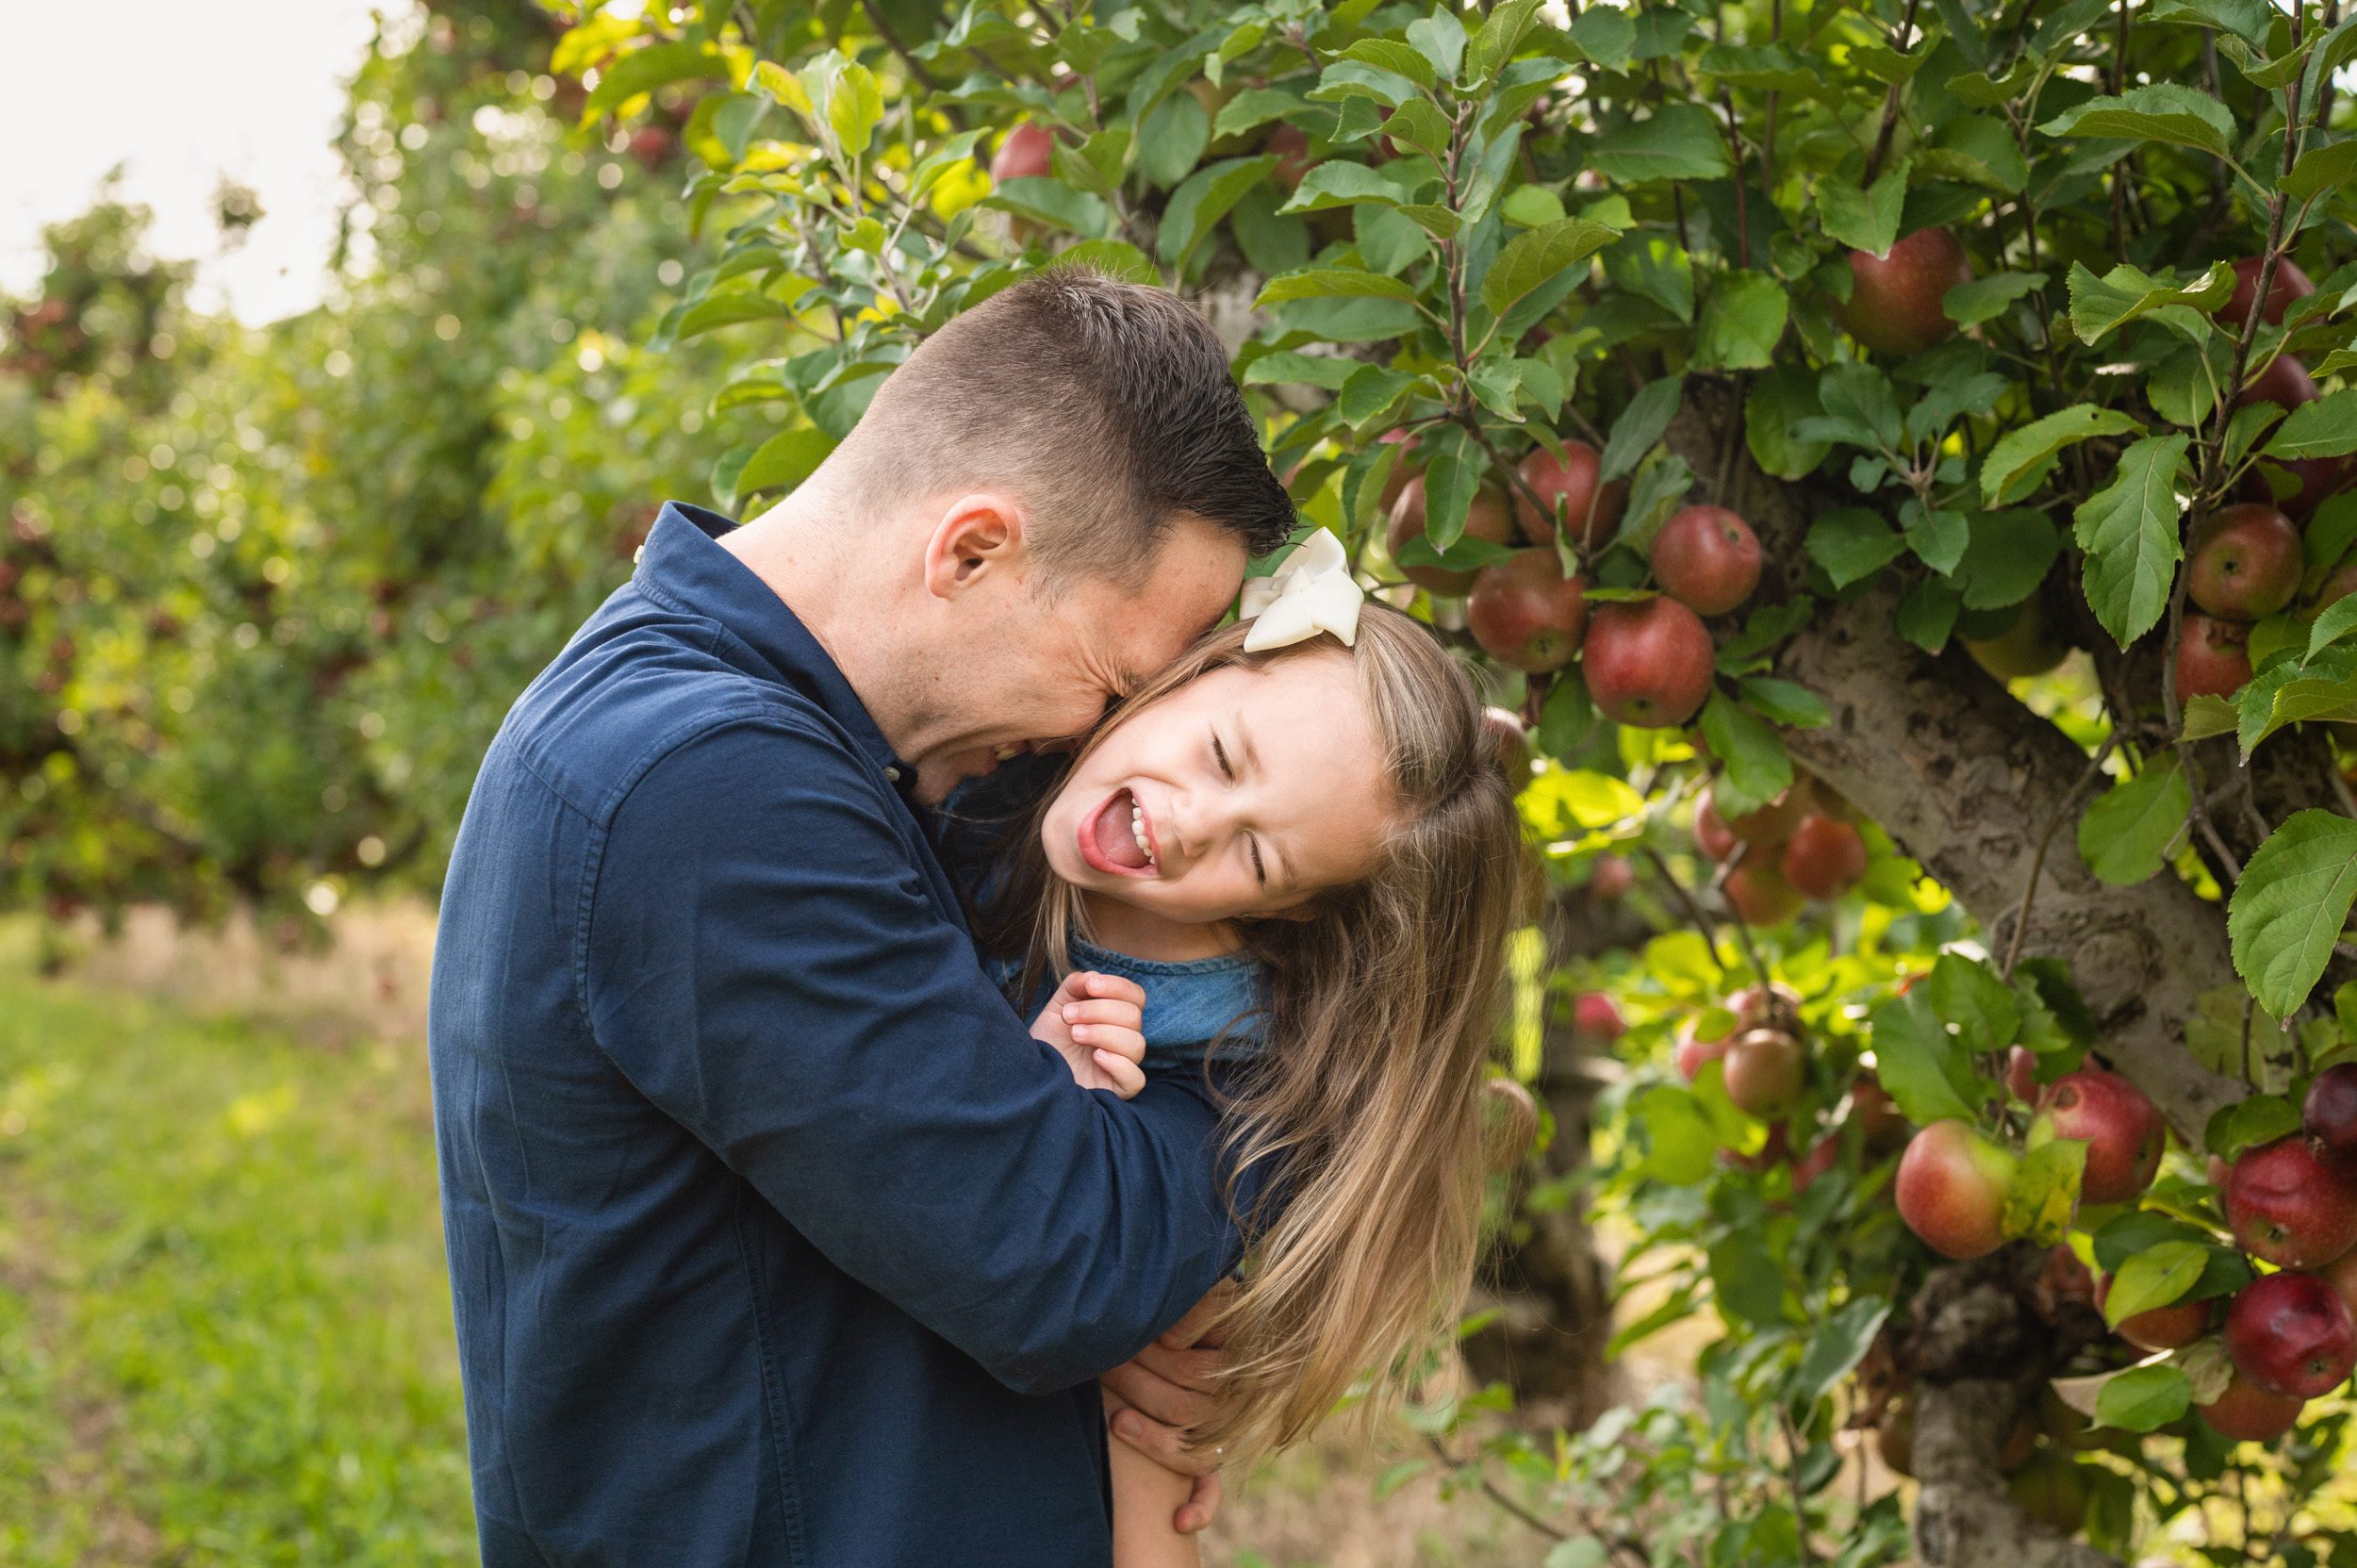 A dad making his daughter laugh by blowing raspberries on her neck in an apple orchard during a family photo session